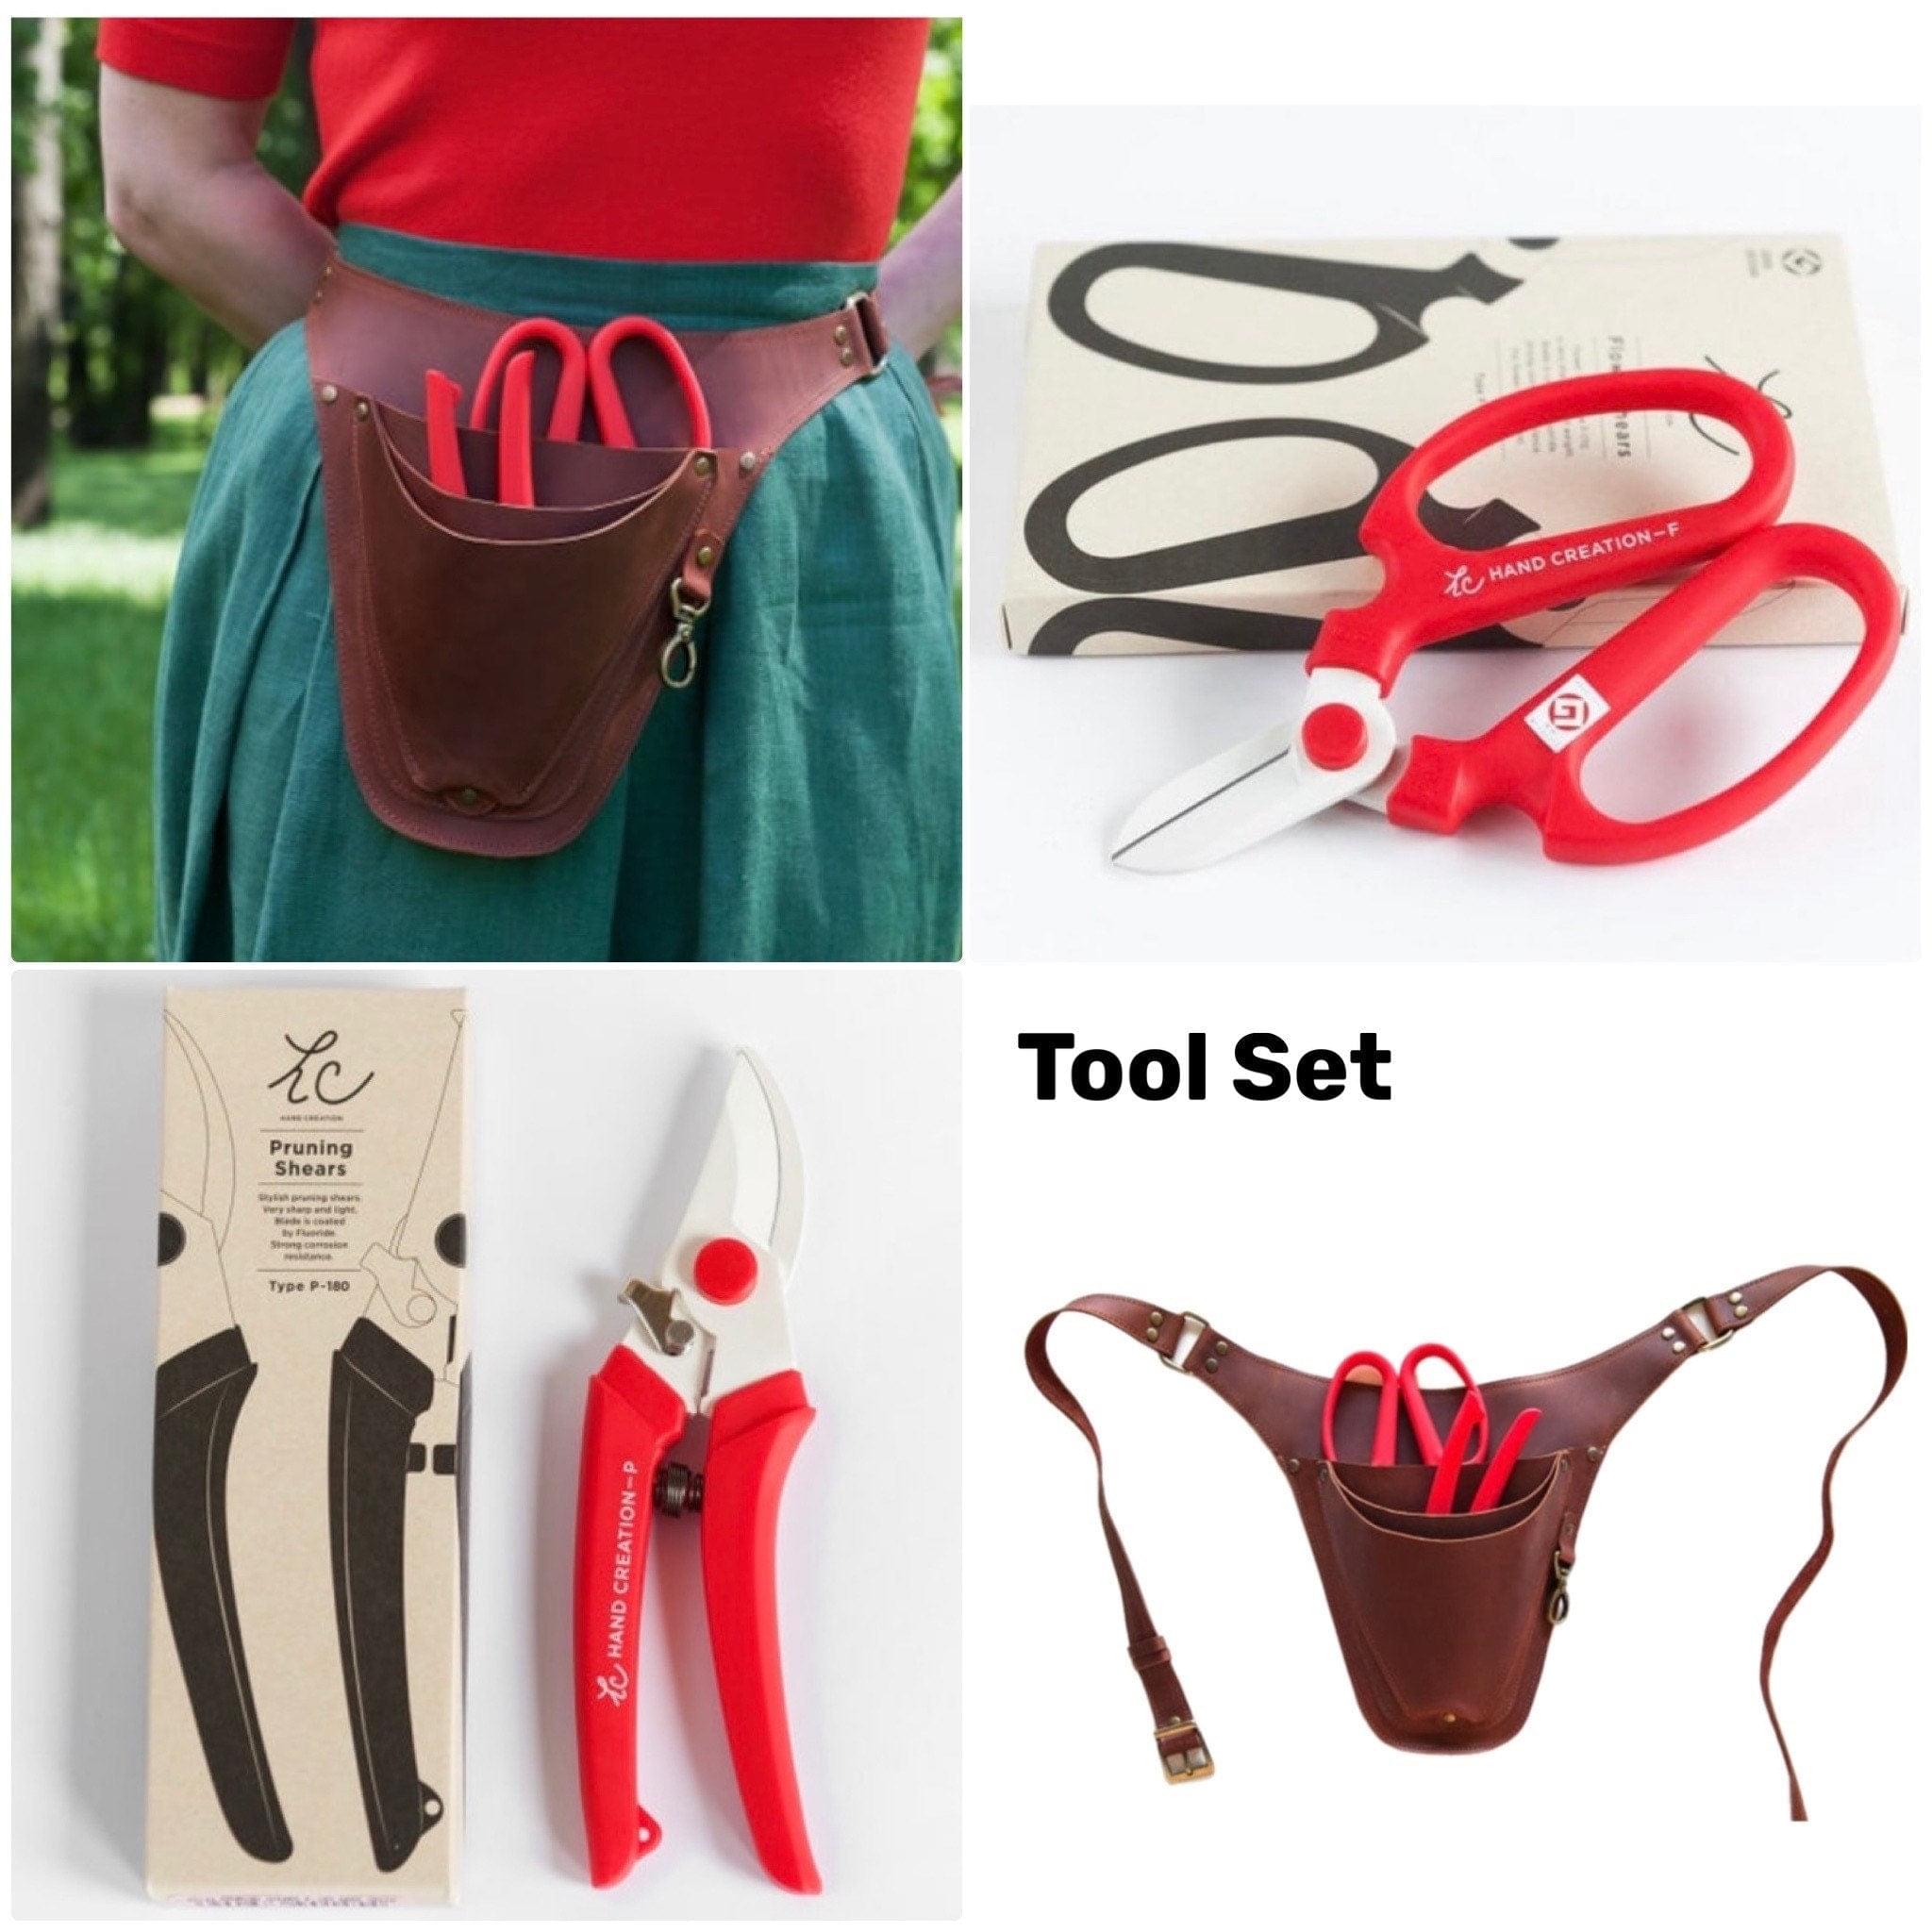 Florist/Gardener Tool Kit (Brown pouch/Red tools)